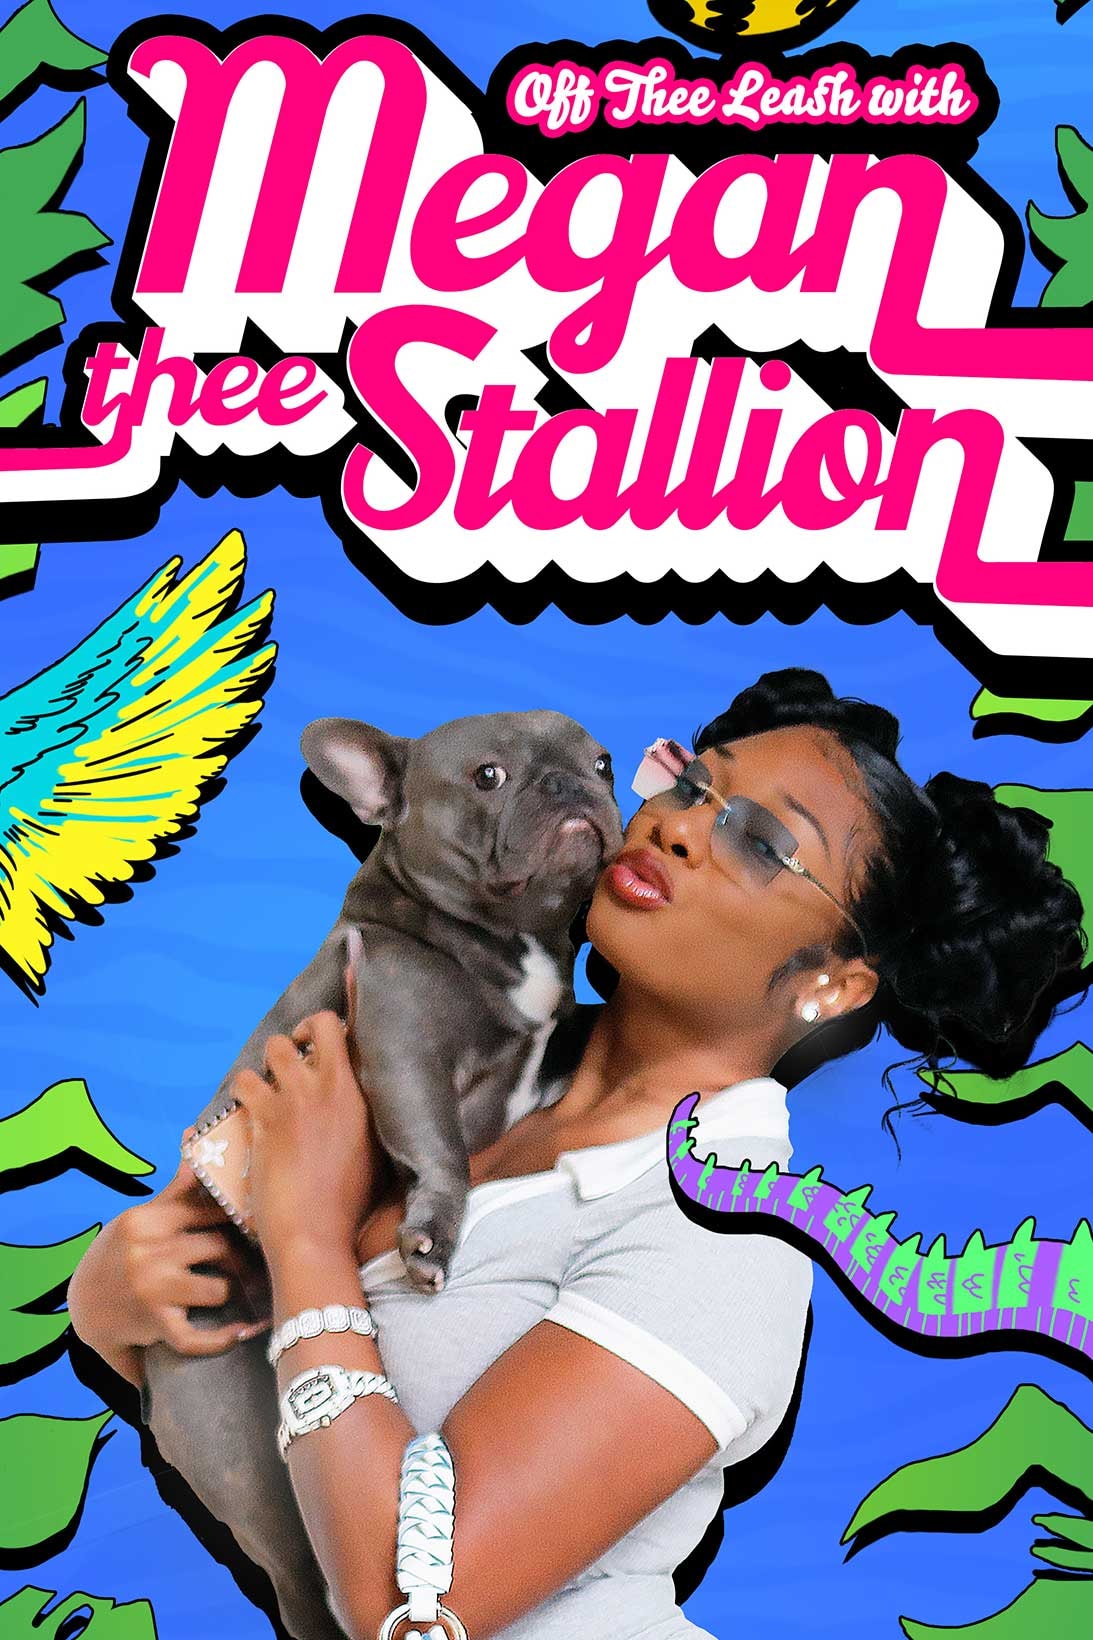 off thee leash with megan stallion pets snapchat original series show